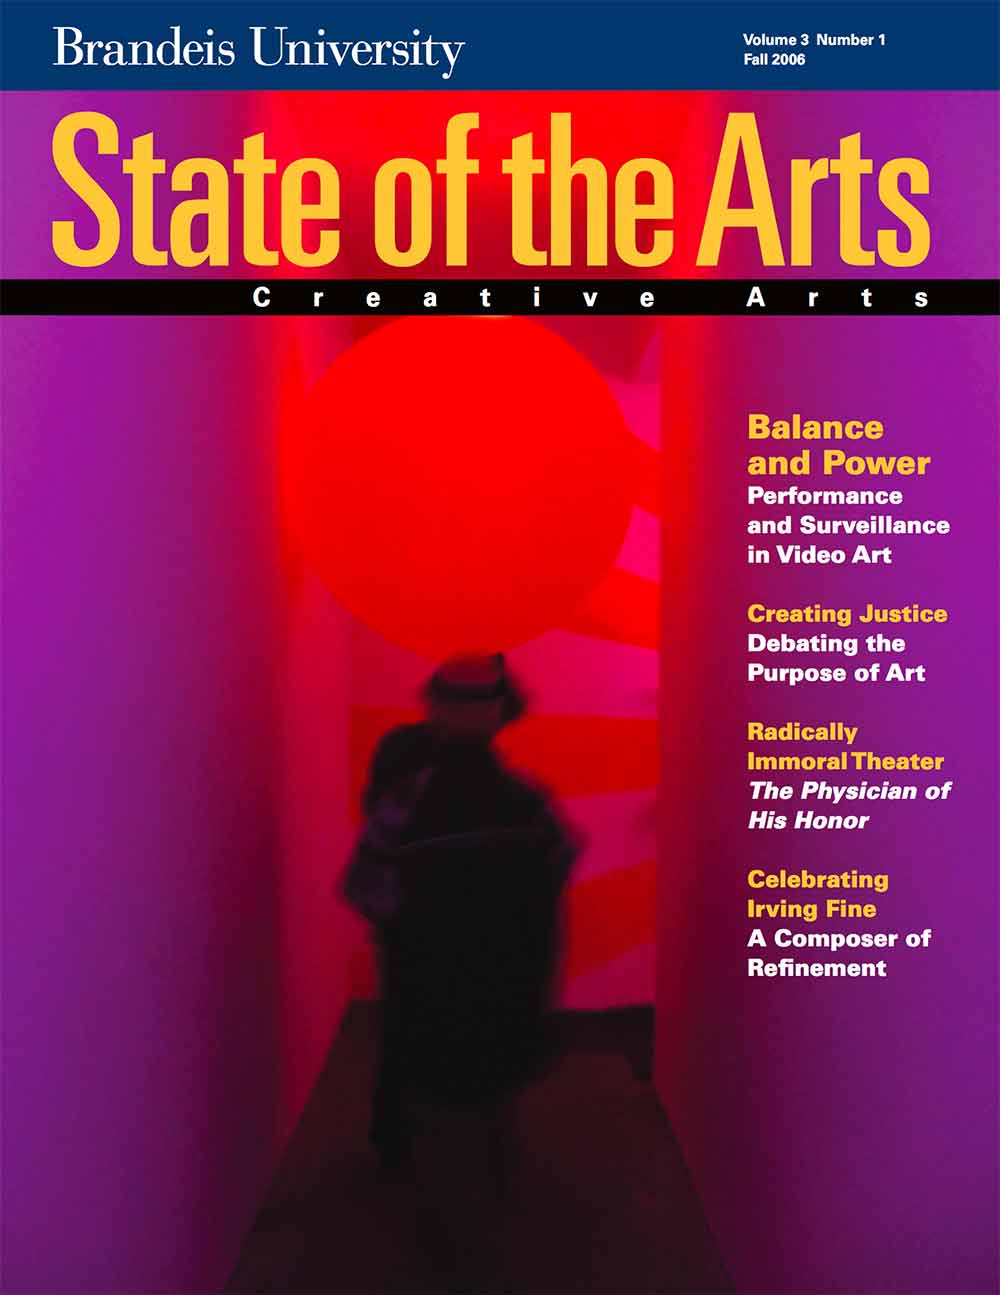 Fall 2006 State of the Arts Cover